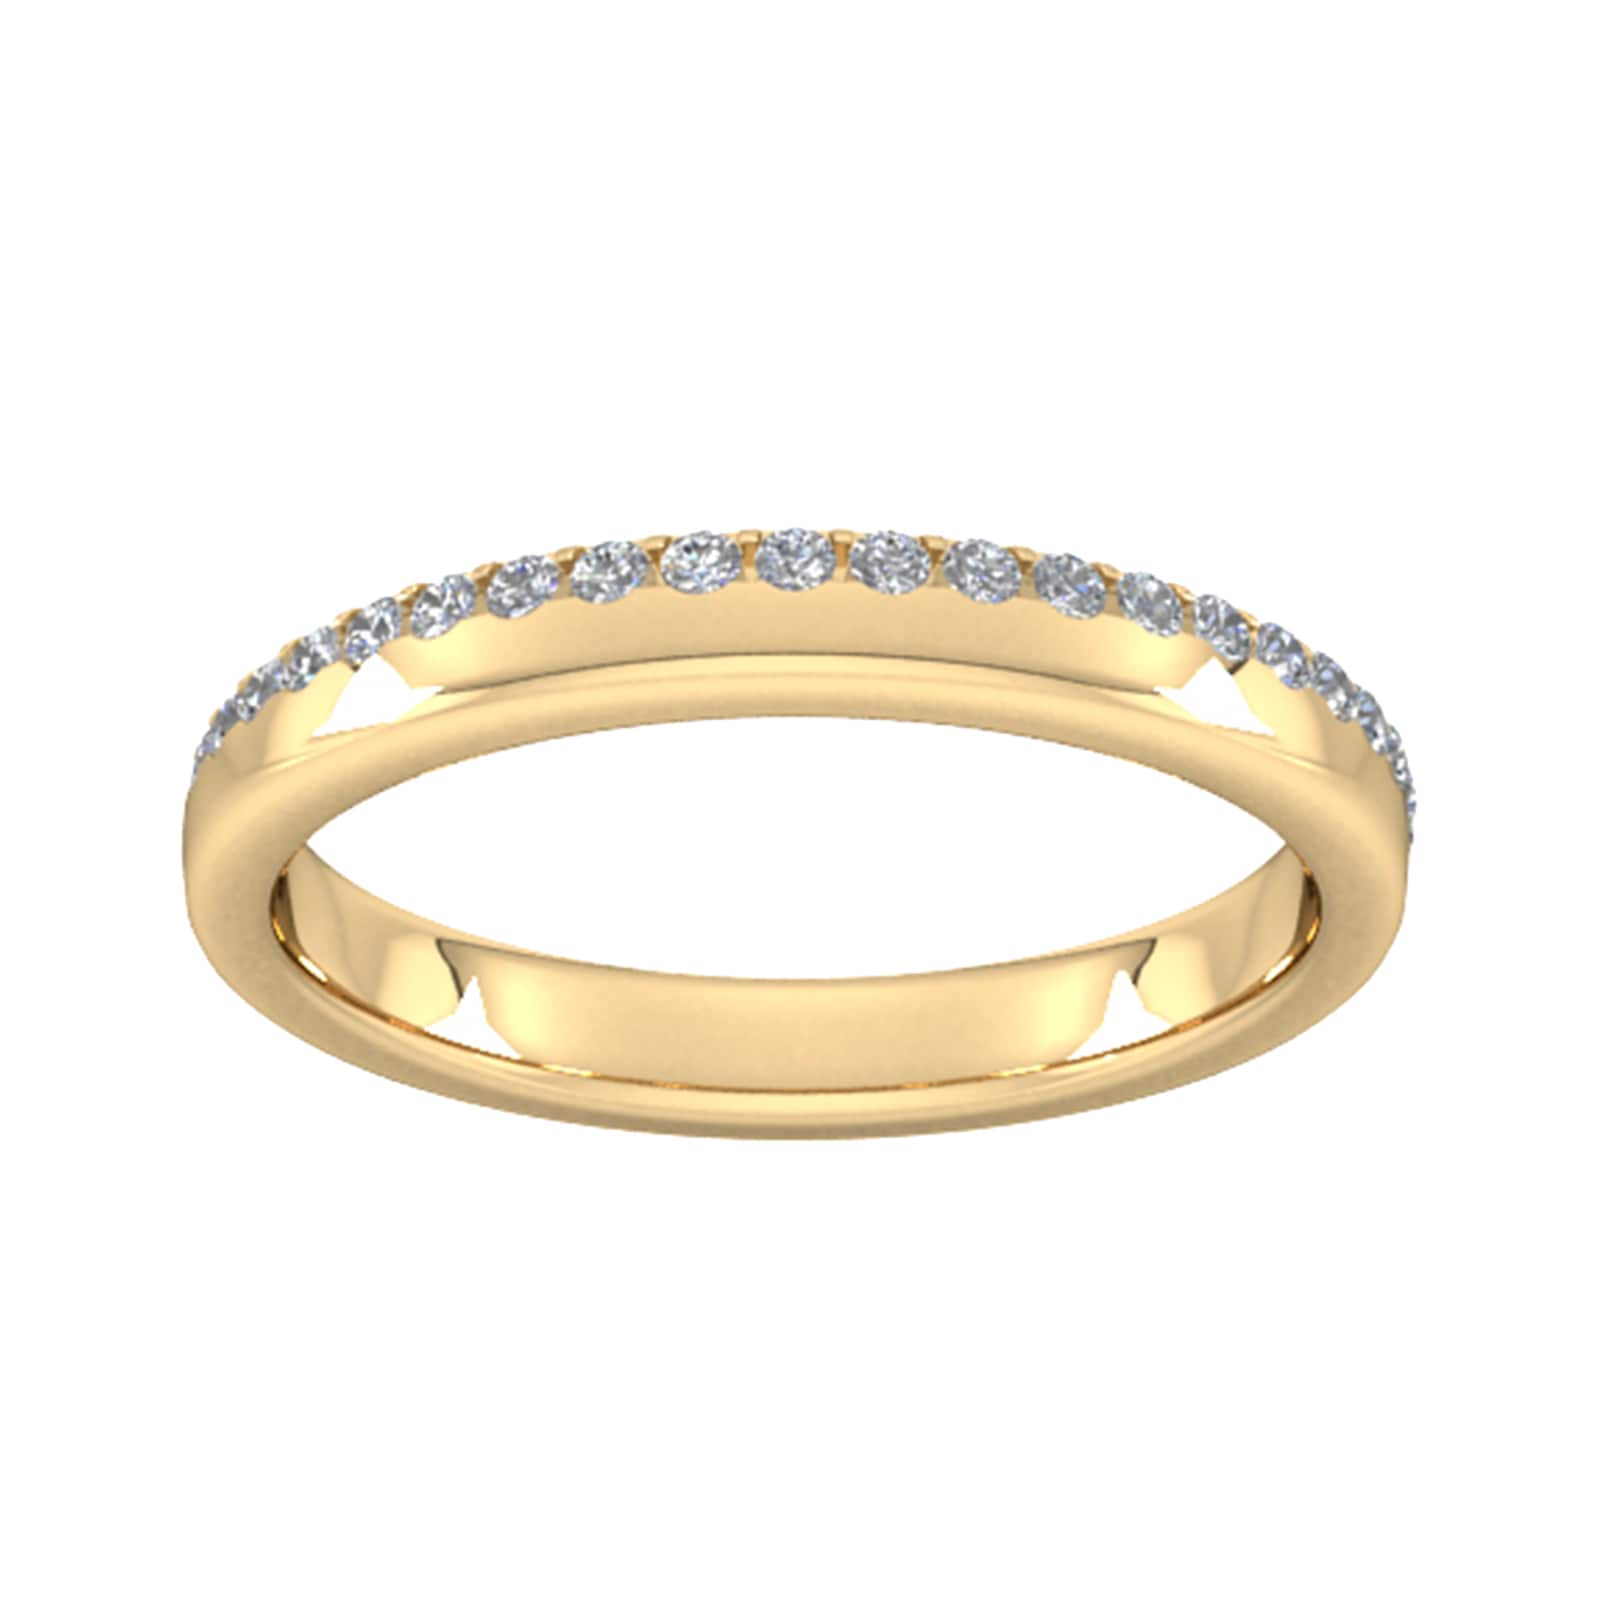 0.42 Carat Total Weight Brilliant Cut Wave Claw Set Diamond Wedding Ring In 9 Carat Yellow Gold - Ring Size L